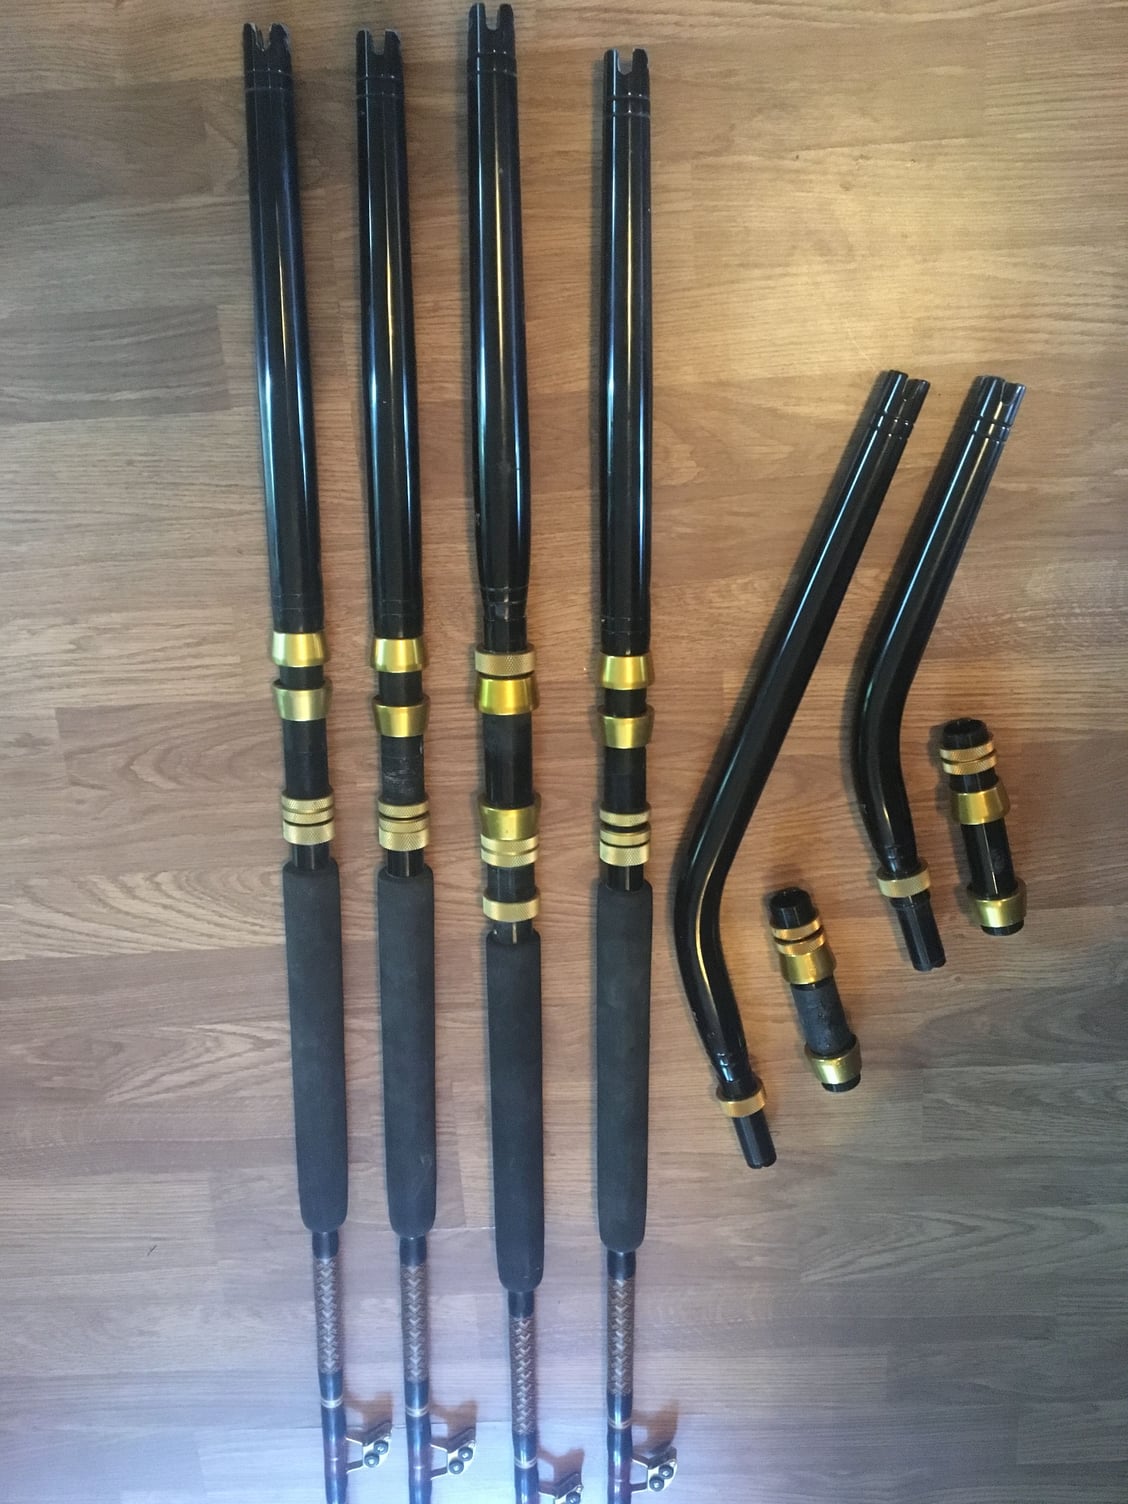 J&M rod bent and straight butts, 4 Chaos Rods, Aftco storabutt systems -  The Hull Truth - Boating and Fishing Forum